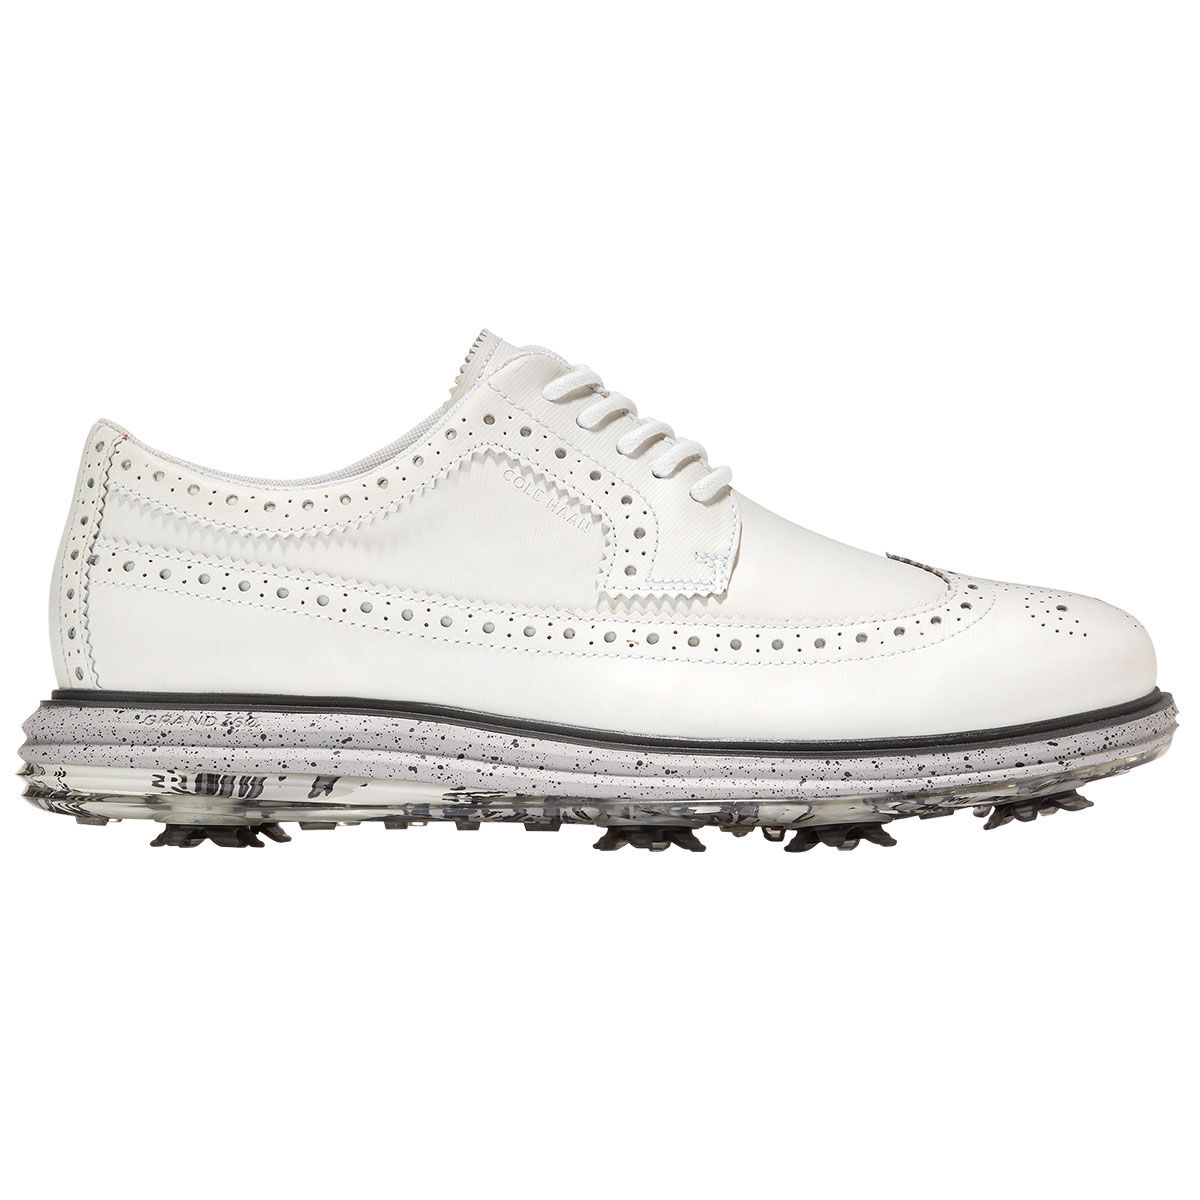 Cole Haan Men’s White and Grey Waterproof OG Tour Golf Spiked Golf Shoes, Size: 8 | American Golf